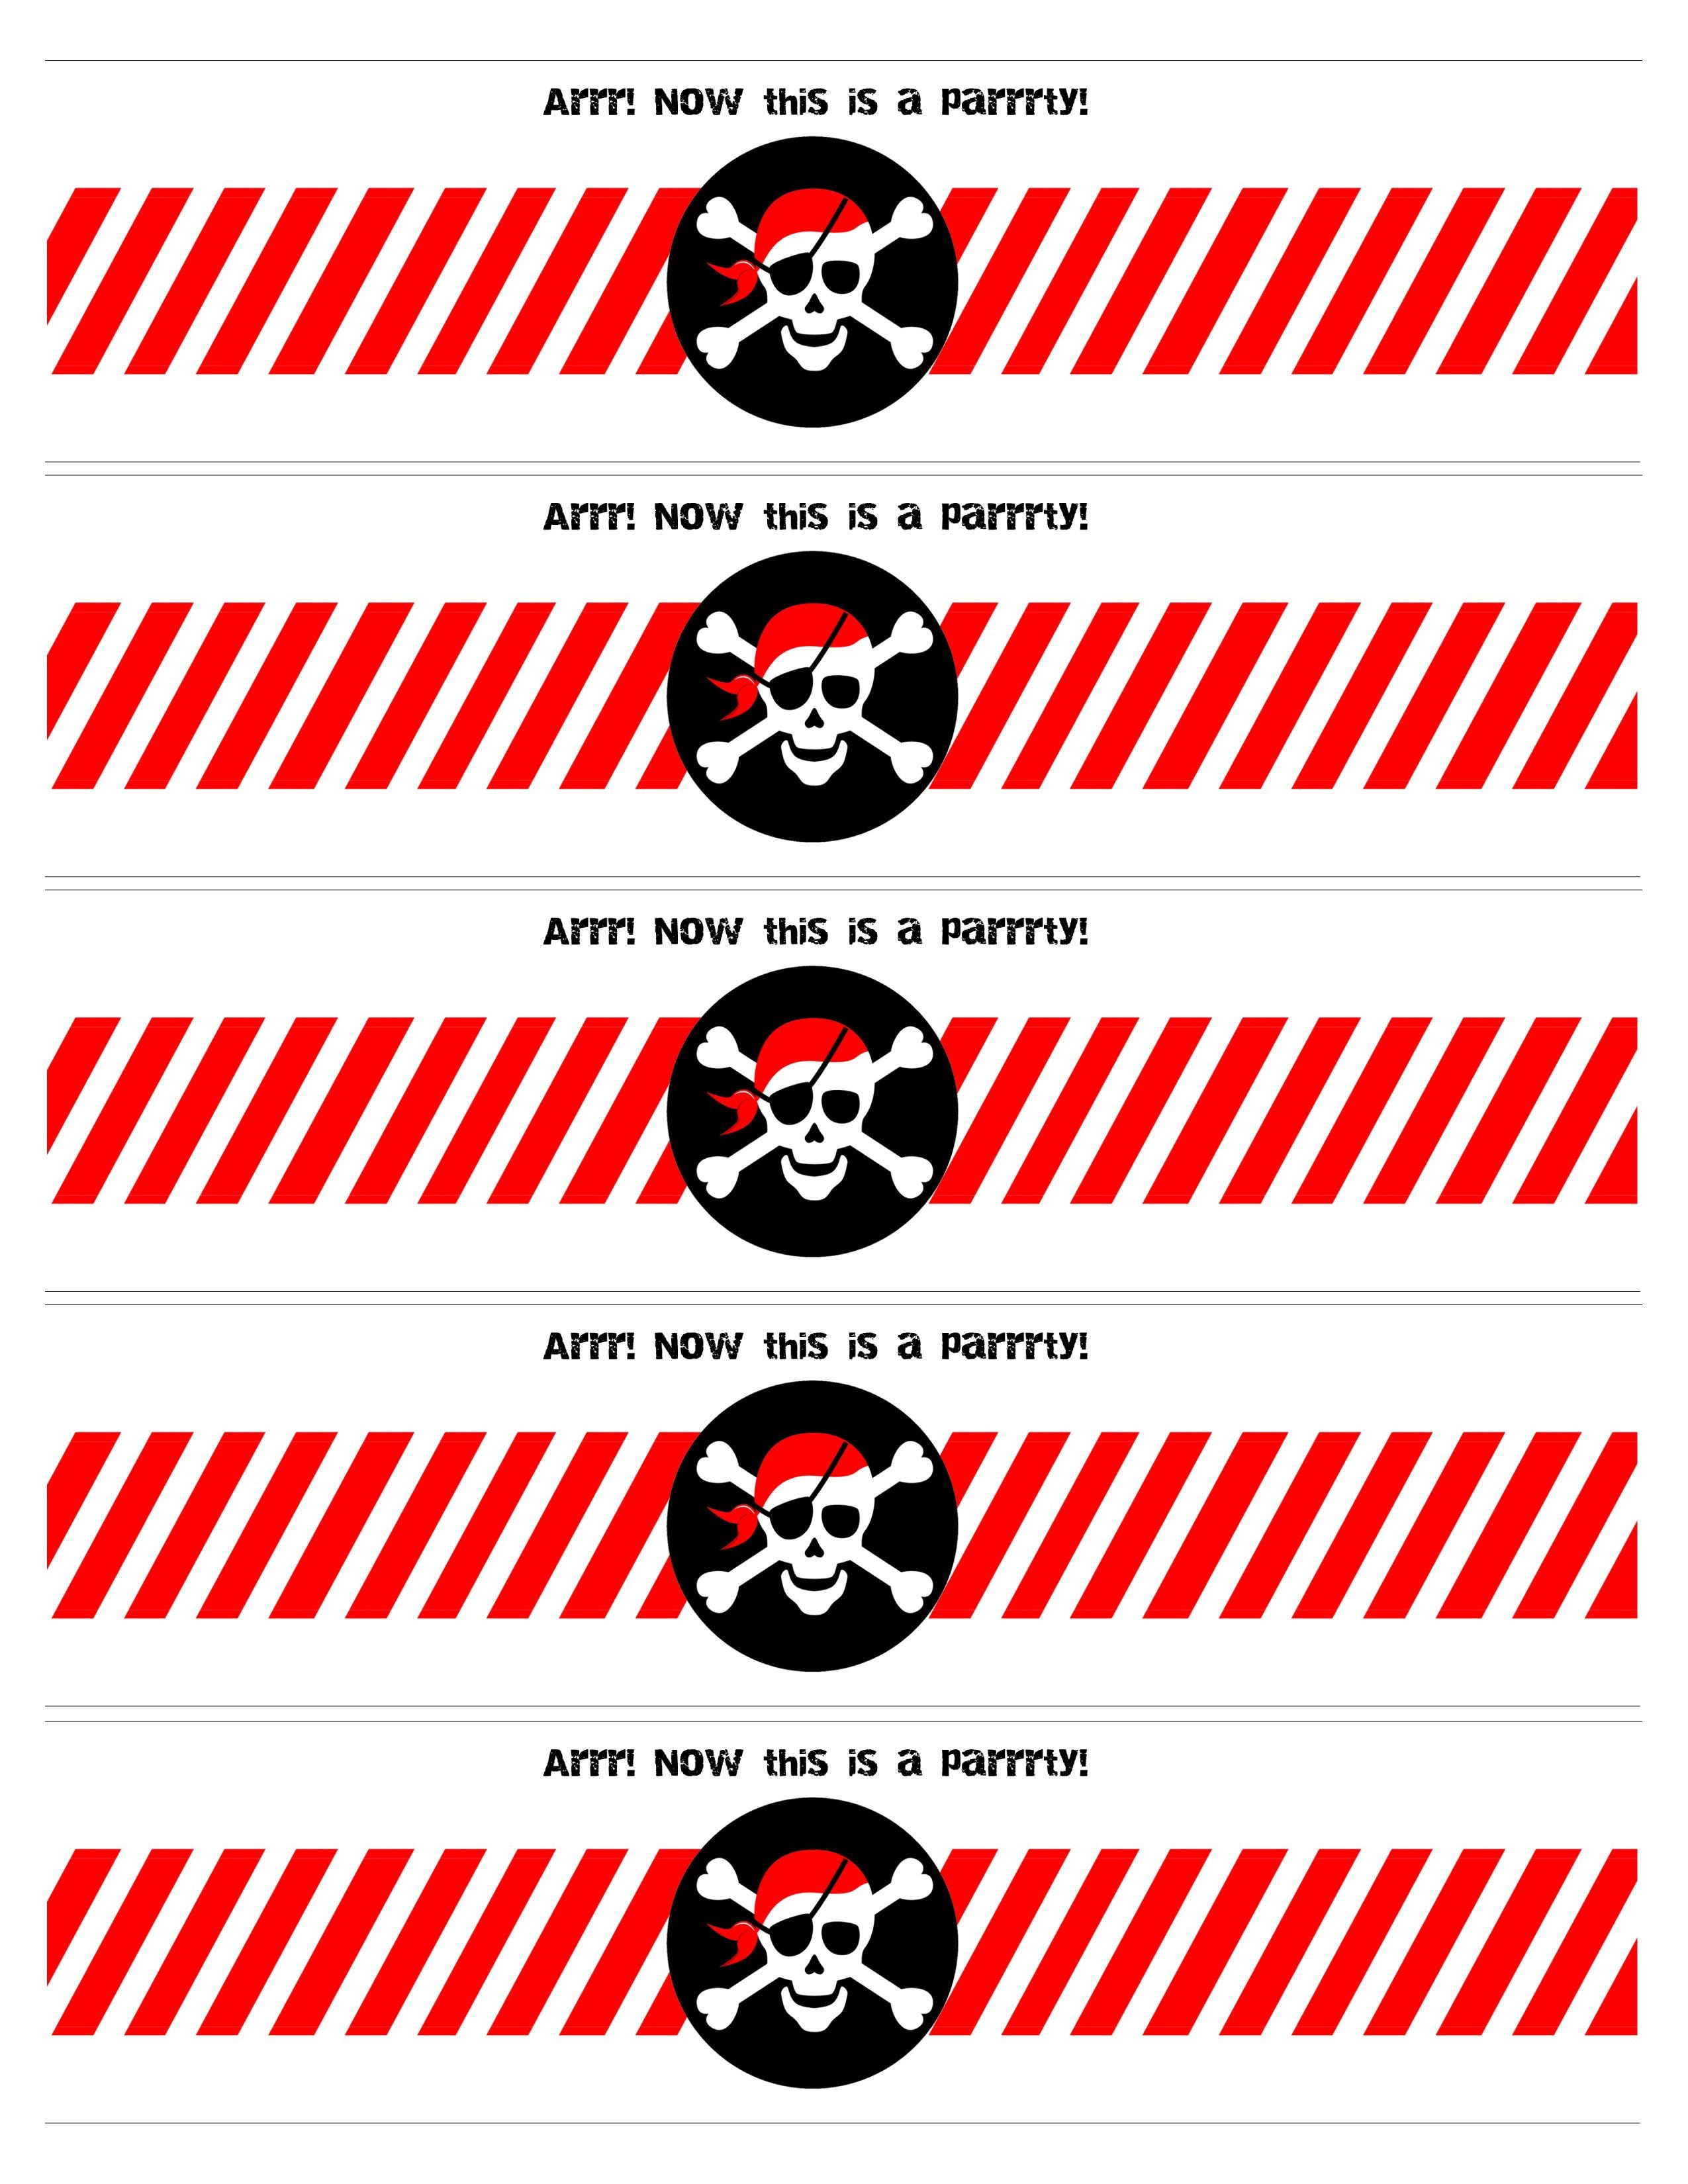 Pirate Birthday Party With Free Printables | Free Label Printables - Free Printable Pirate Cupcake Toppers